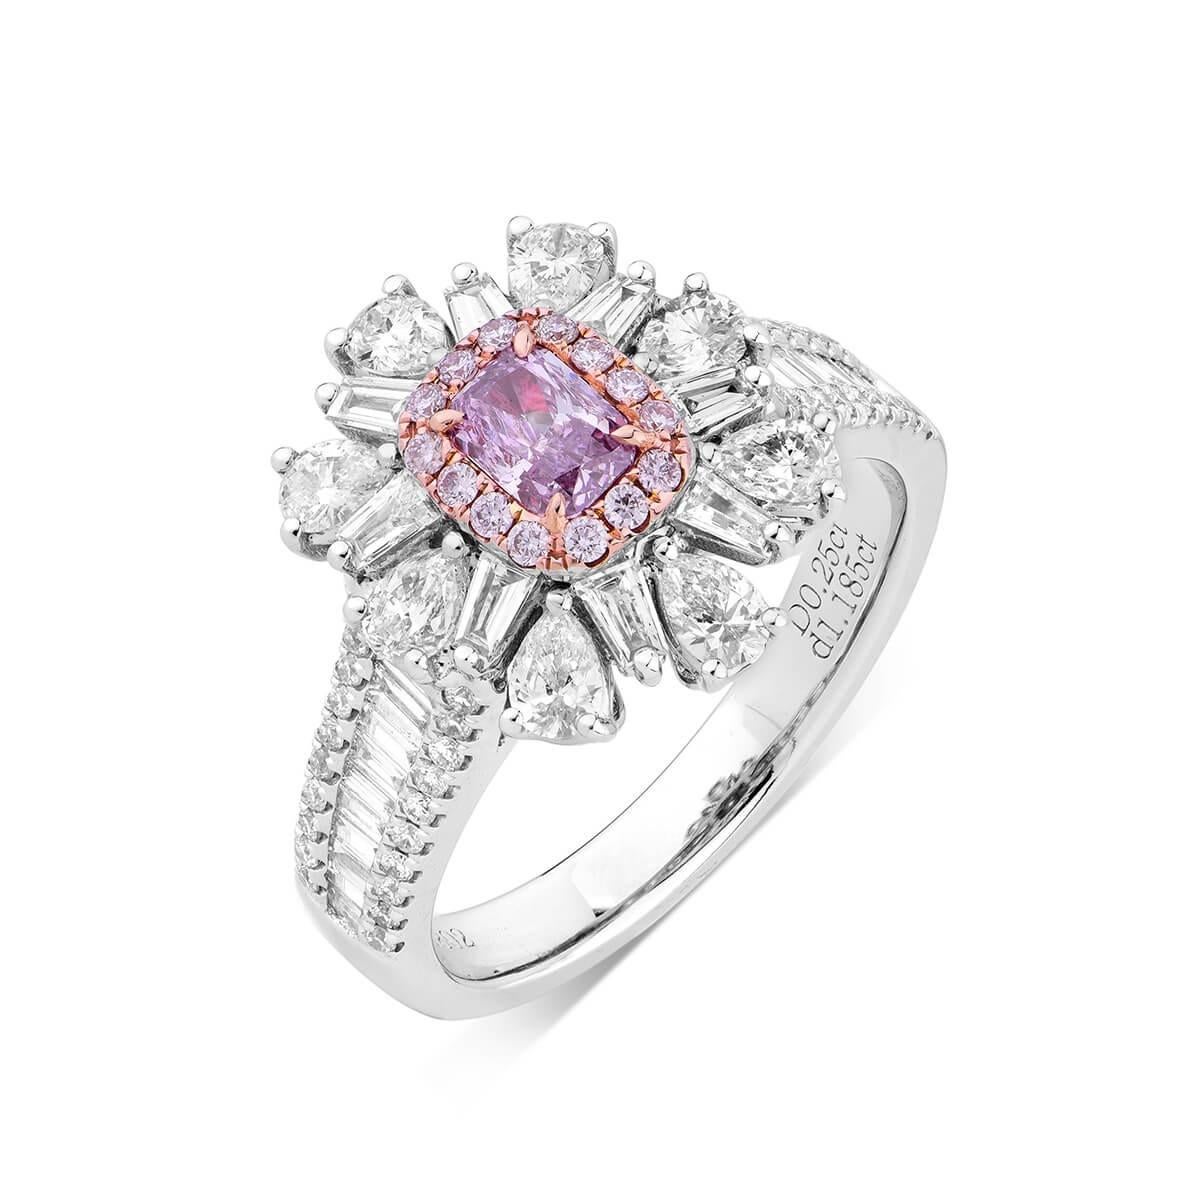 WHITE GOLD FANCY PINK RADIANT CUT AND WHITE DIAMOND RING - 1.44 CT


Set in 18K White Gold



Total pink diamond weight: 0.25 ct
[ 1 diamond ]
Color: Fancy Intense purple-pink 

Total white diamond weight: 1.11 ct
[ 75 diamonds ] 
Color: